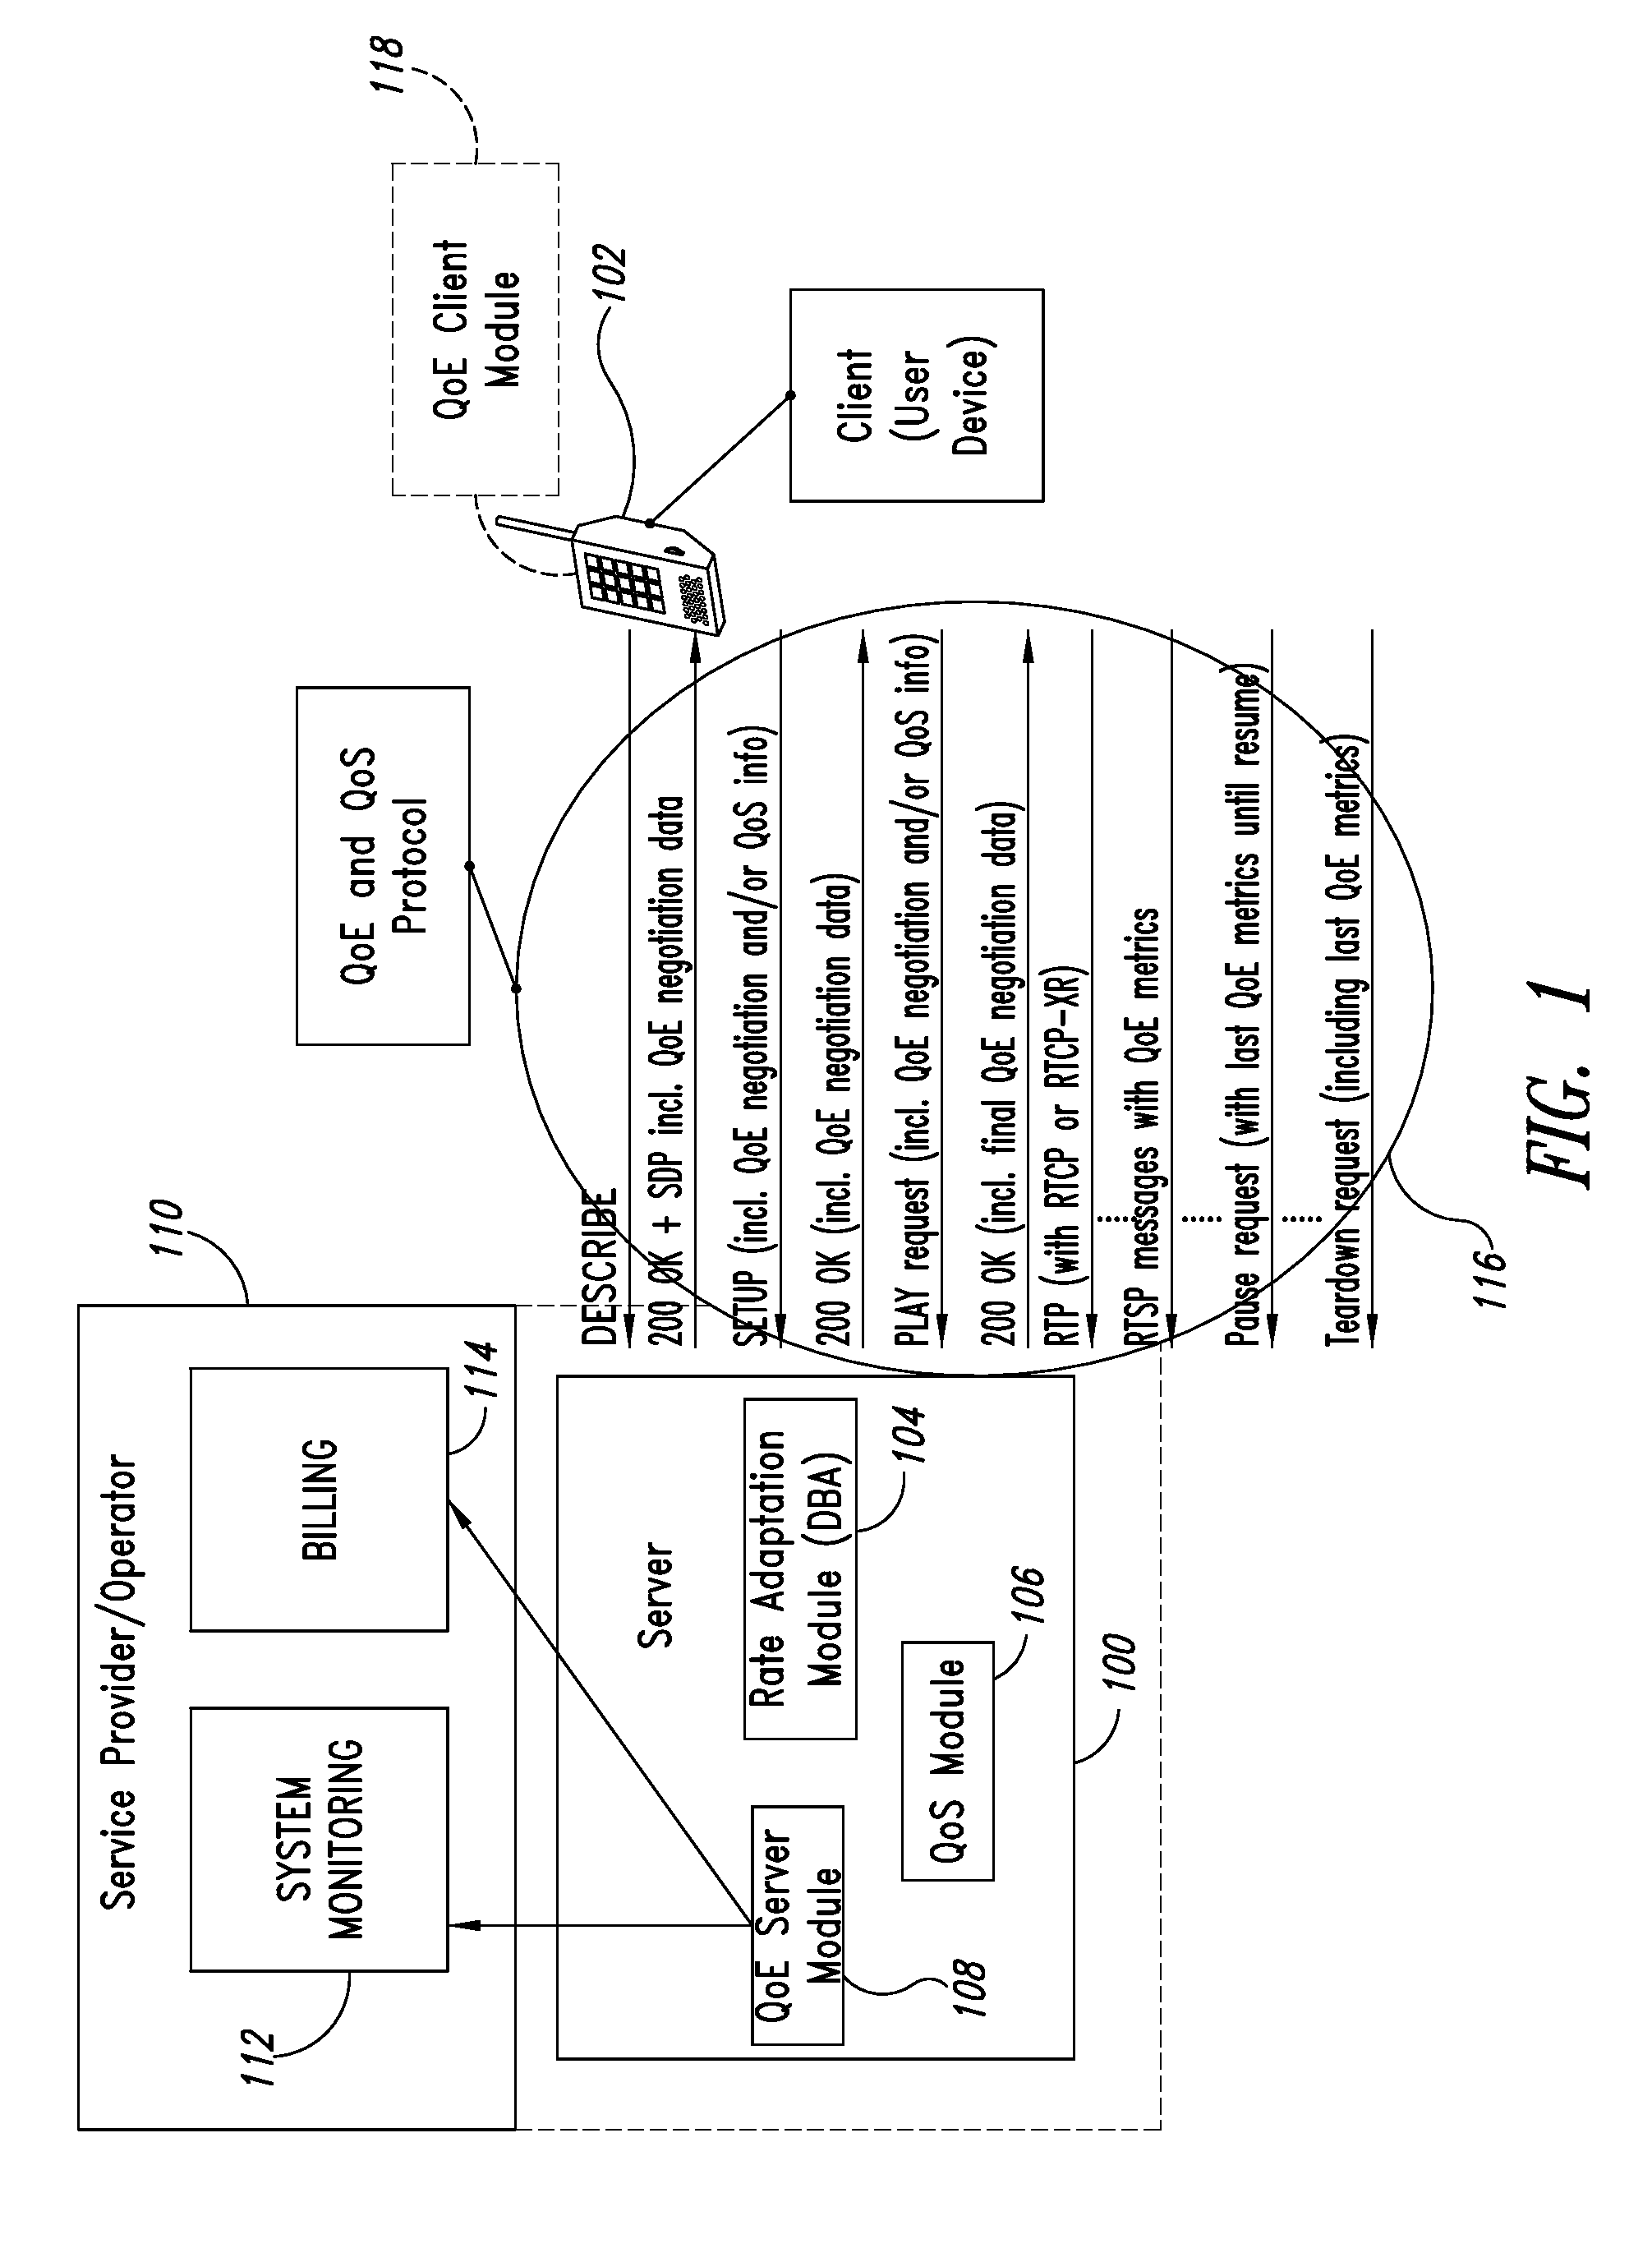 Quality of experience (QoE) method and apparatus for wireless communication networks